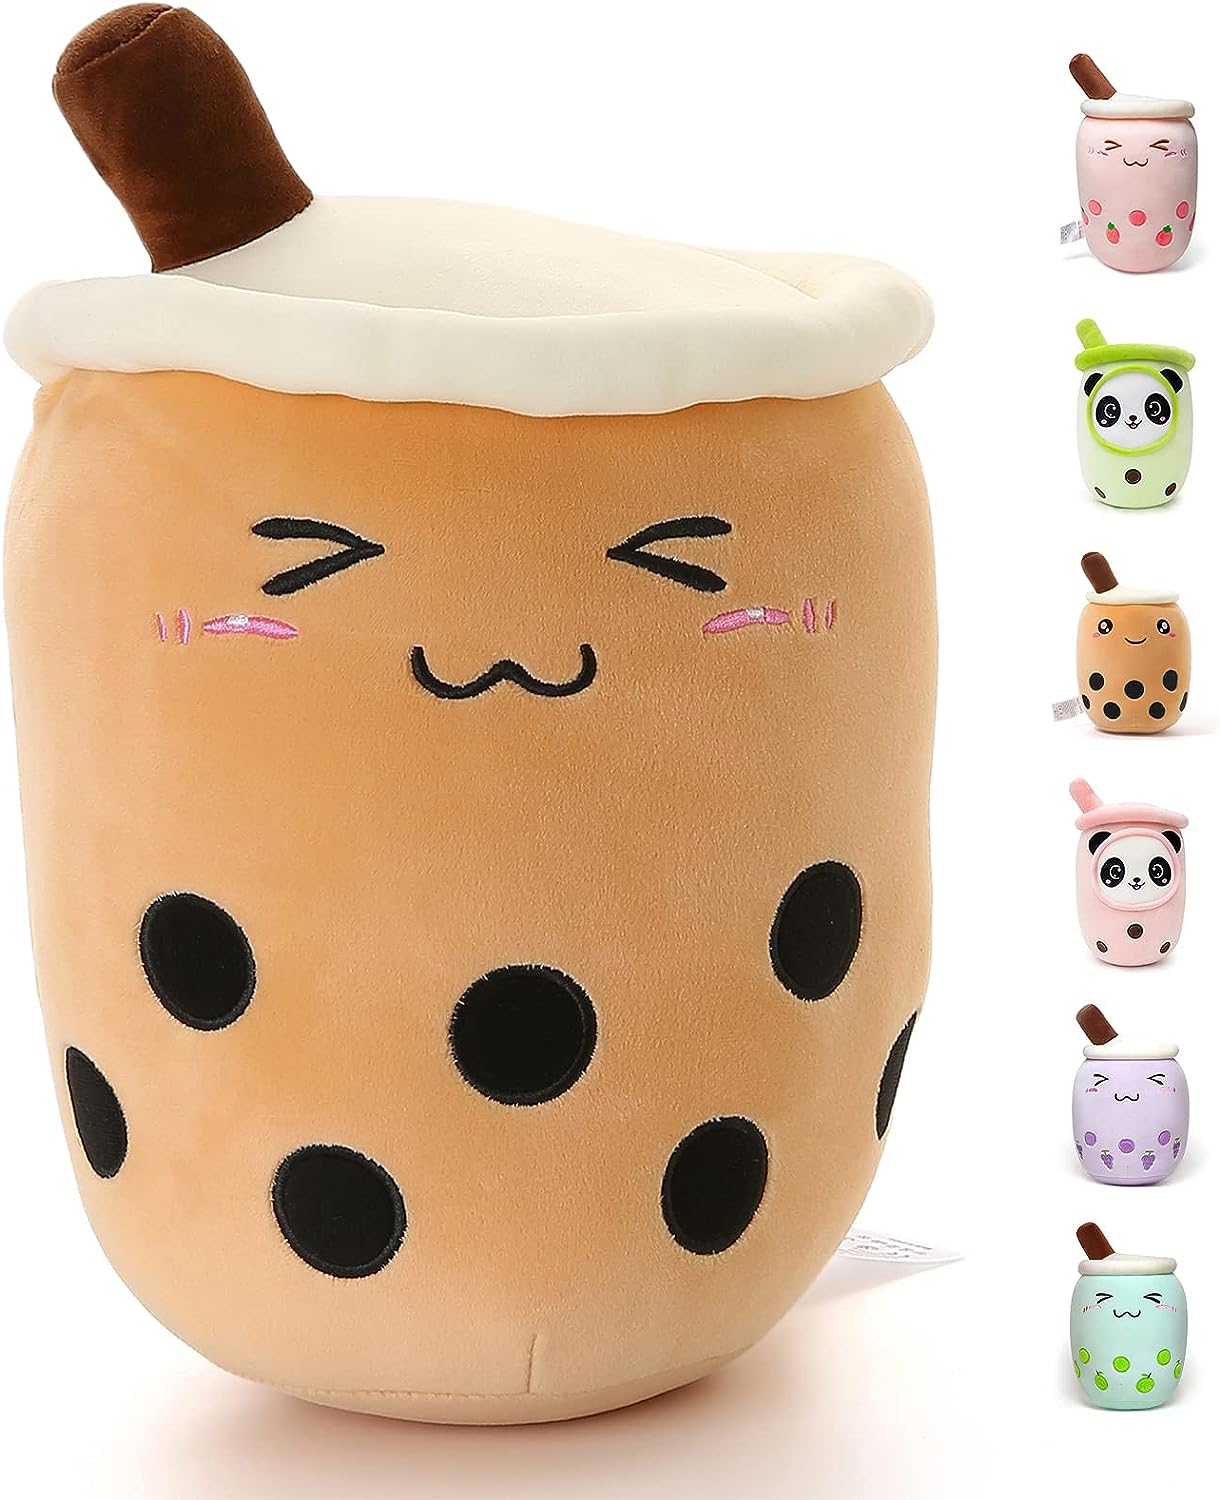 Niuniu Daddy Stuffed Boba Plushies 13.7in Squishy Bubble Tea Plush Toy Pillow Cute Milk Tea Adorable Cuddle Pillow Stuffed Food Toy for Baby/Kids/Toddler Great Gift for Birthday/Christmas